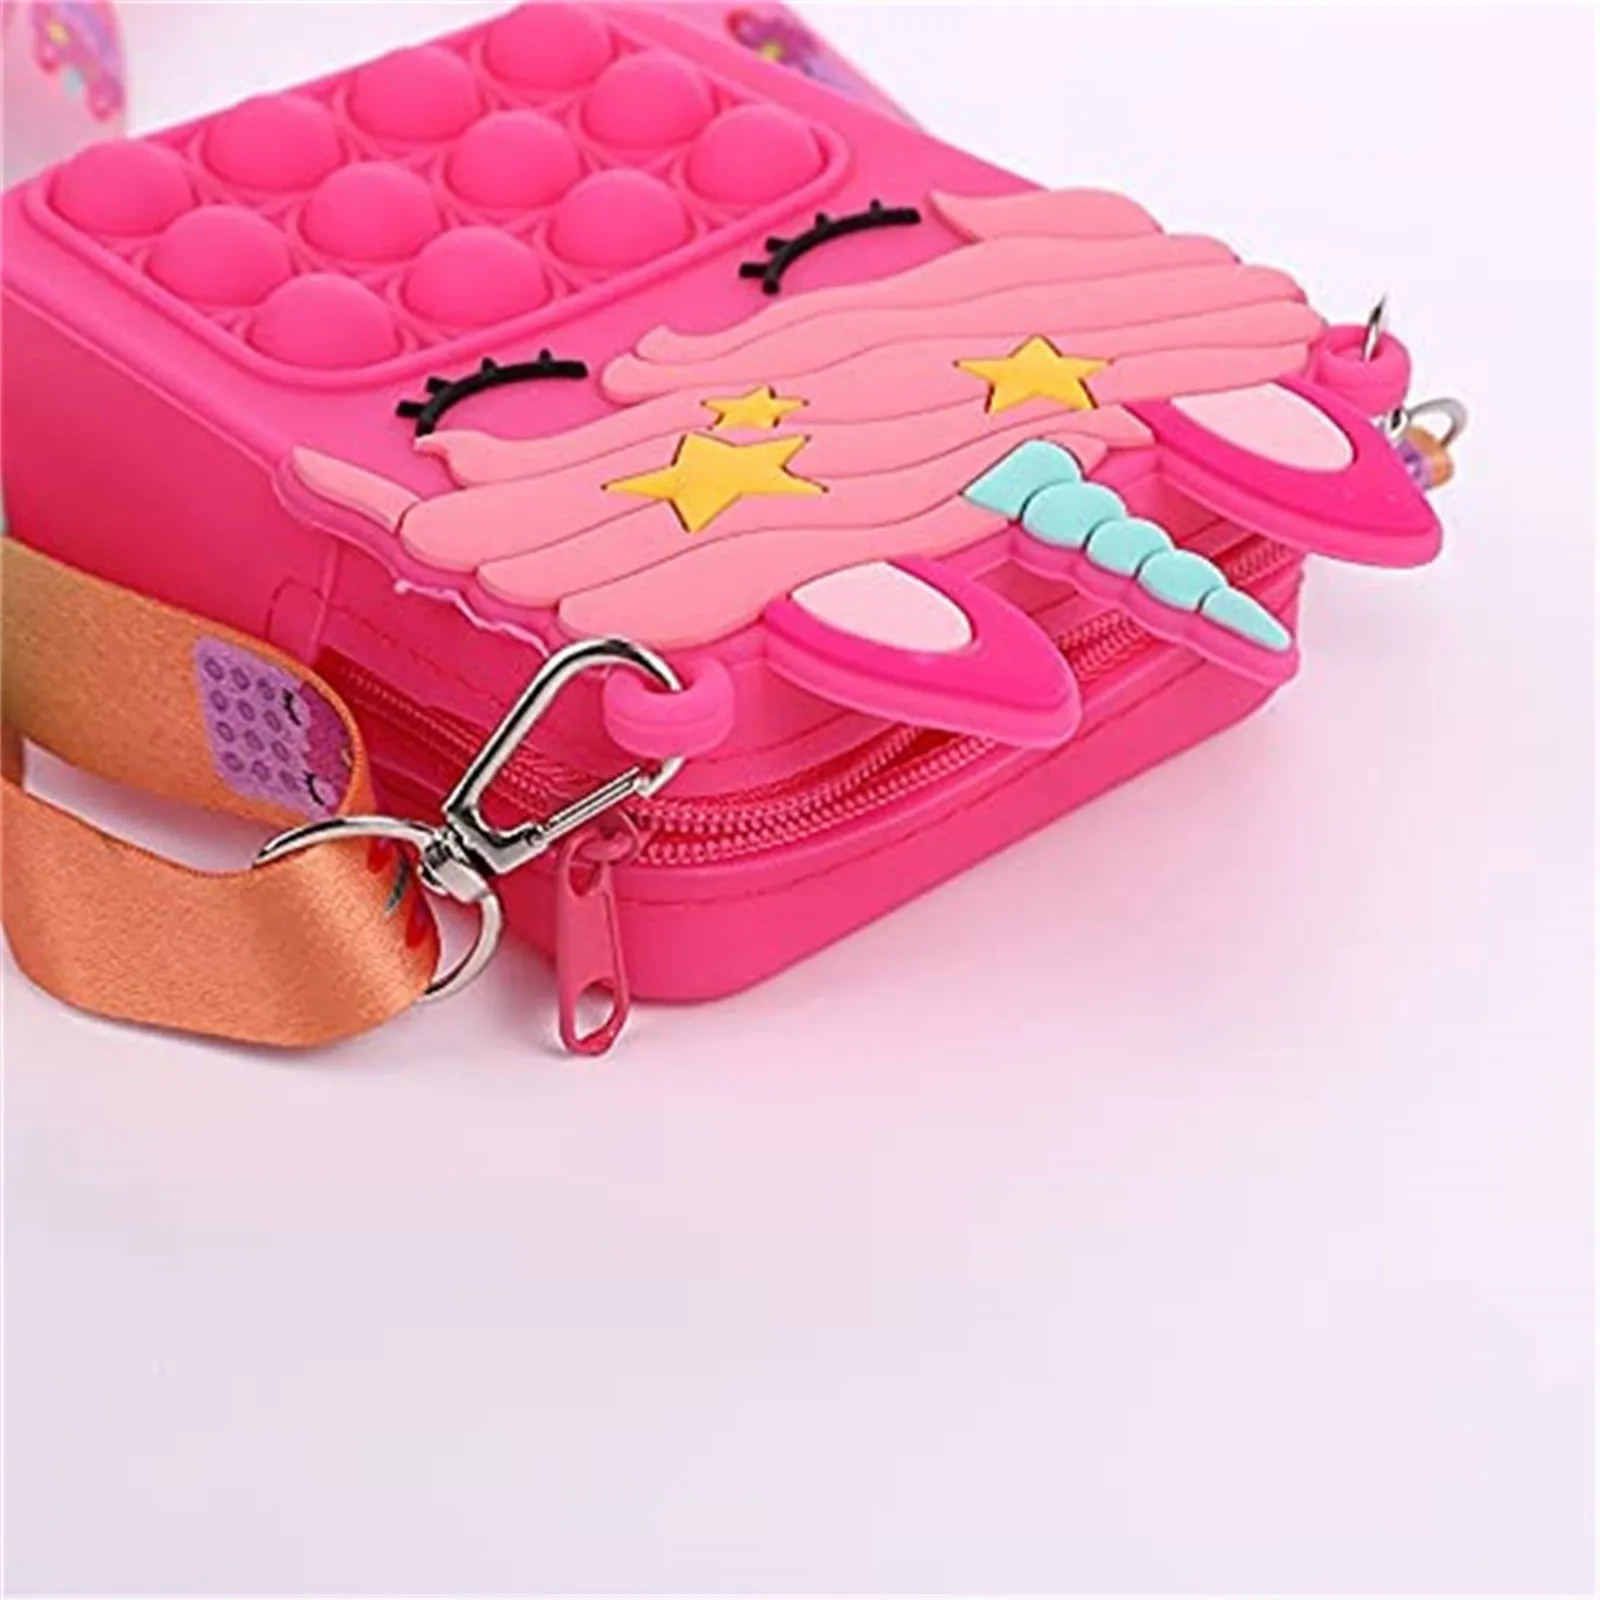 Fidget Toys Dimple Pops Its Messenger Bag Antistress Push Bubble Children Toy Keychain Wallet Toys Gift For Girl Cute Bags Gift stress ball brain